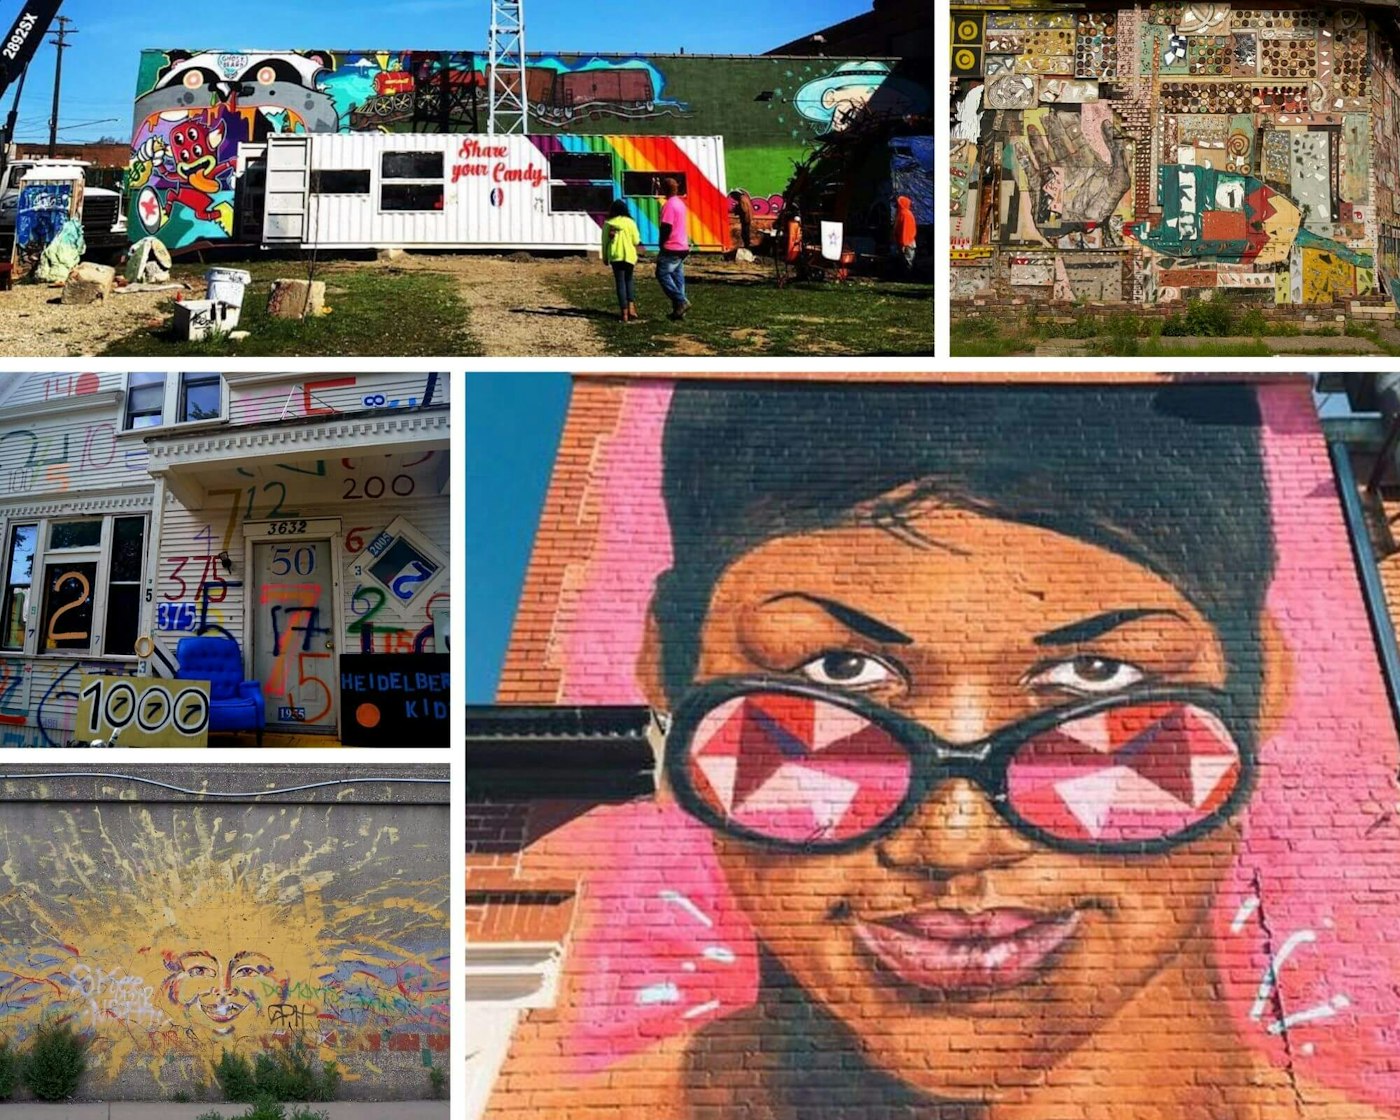 From top left: Lincoln Street Art Park (Photo via Facebook); Dabls Mbad African Bead Museum (Photo via francis mckee on Flickr); Desiree Kelly's Aretha Franklin mural (Photo courtesy of Desiree Kelly); a mural in Detroit's Mexicantown (Photo via Tara on Flickr); A scene from The Heidelberg Project (Photo via Nic Redhead on Flickr)